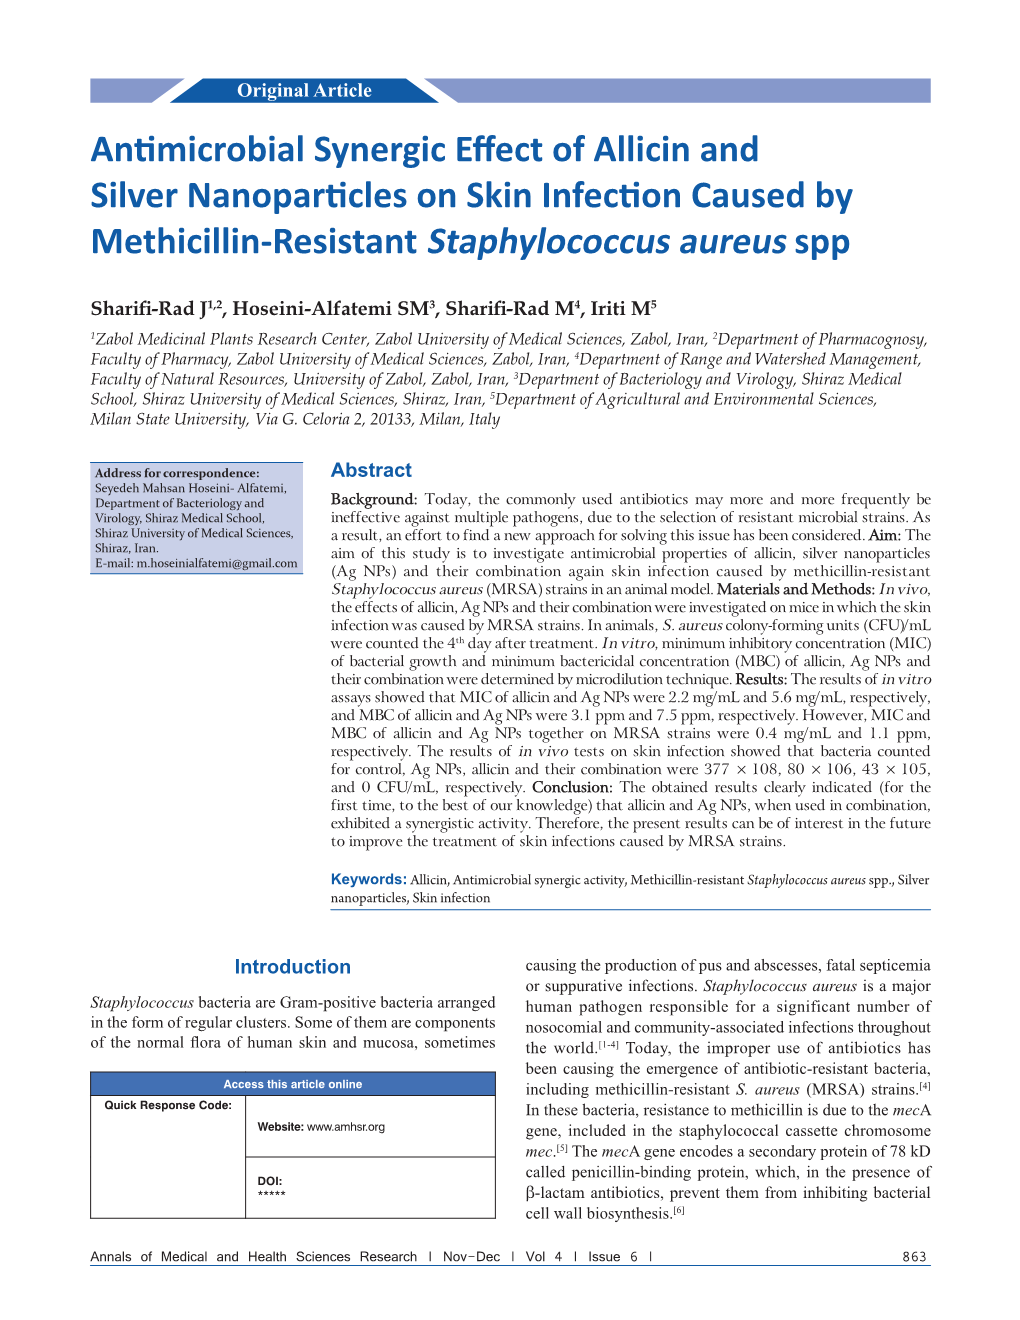 Antimicrobial Synergic Effect of Allicin and Silver Nanoparticles on Skin Infection Caused by Methicillin‑Resistant Staphylococcus Aureus Spp